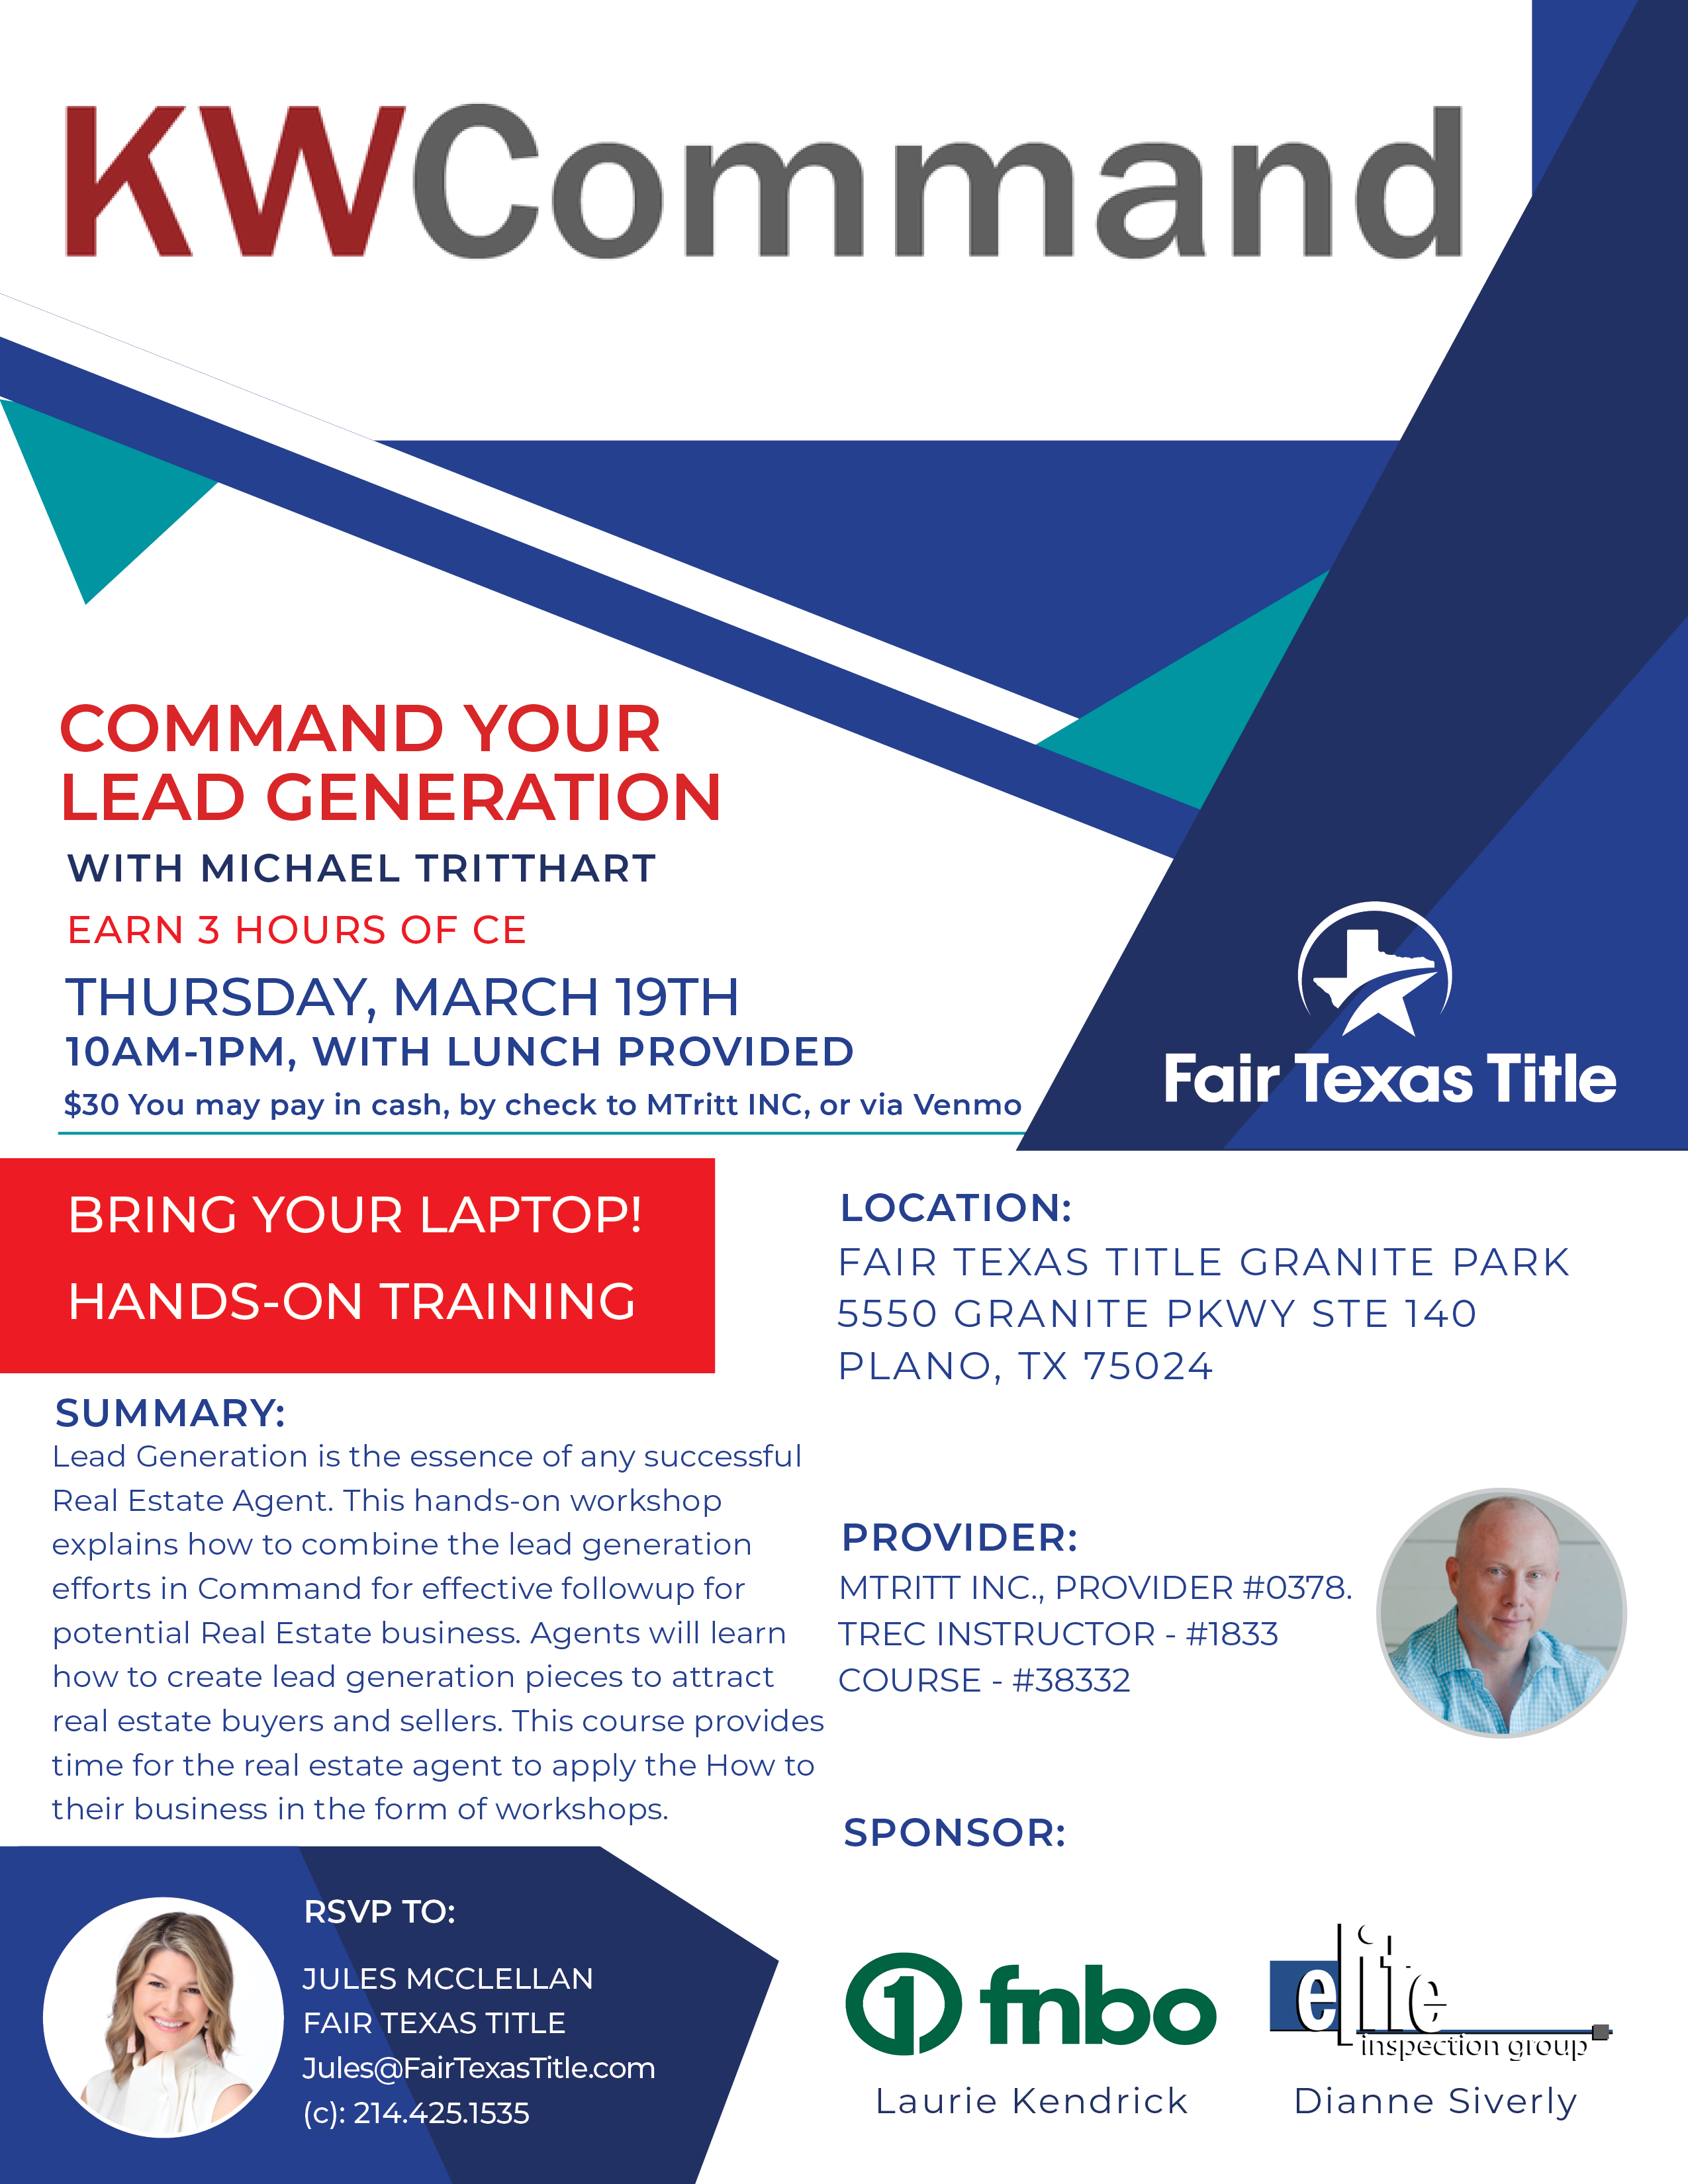 03.19.20 Command Your Lead Generation